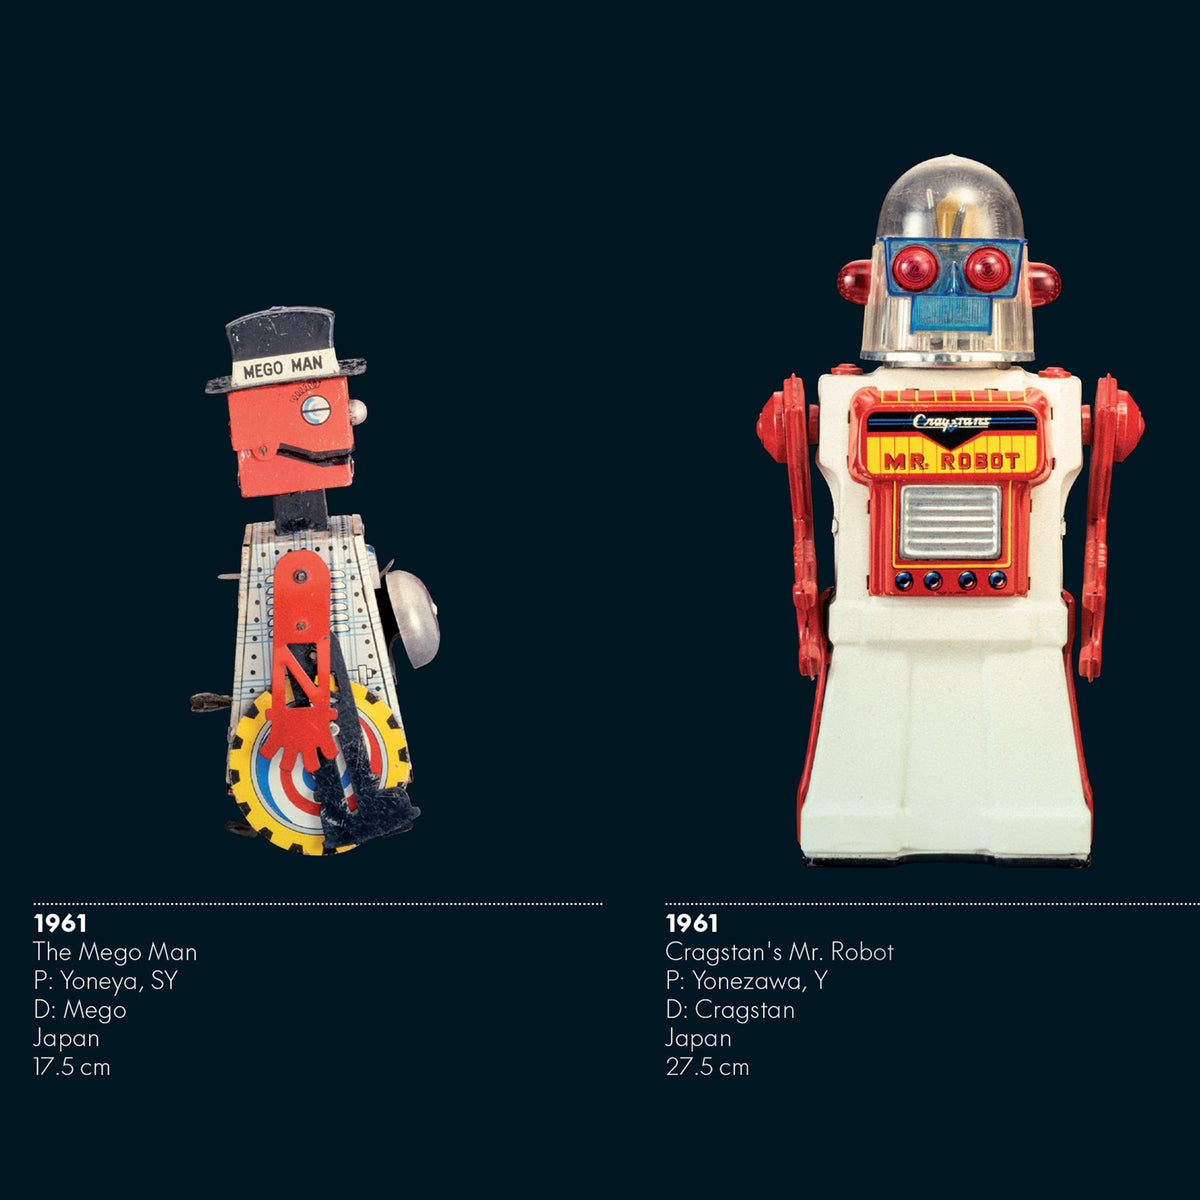 R. F. Robot Collection Poster by Vitra